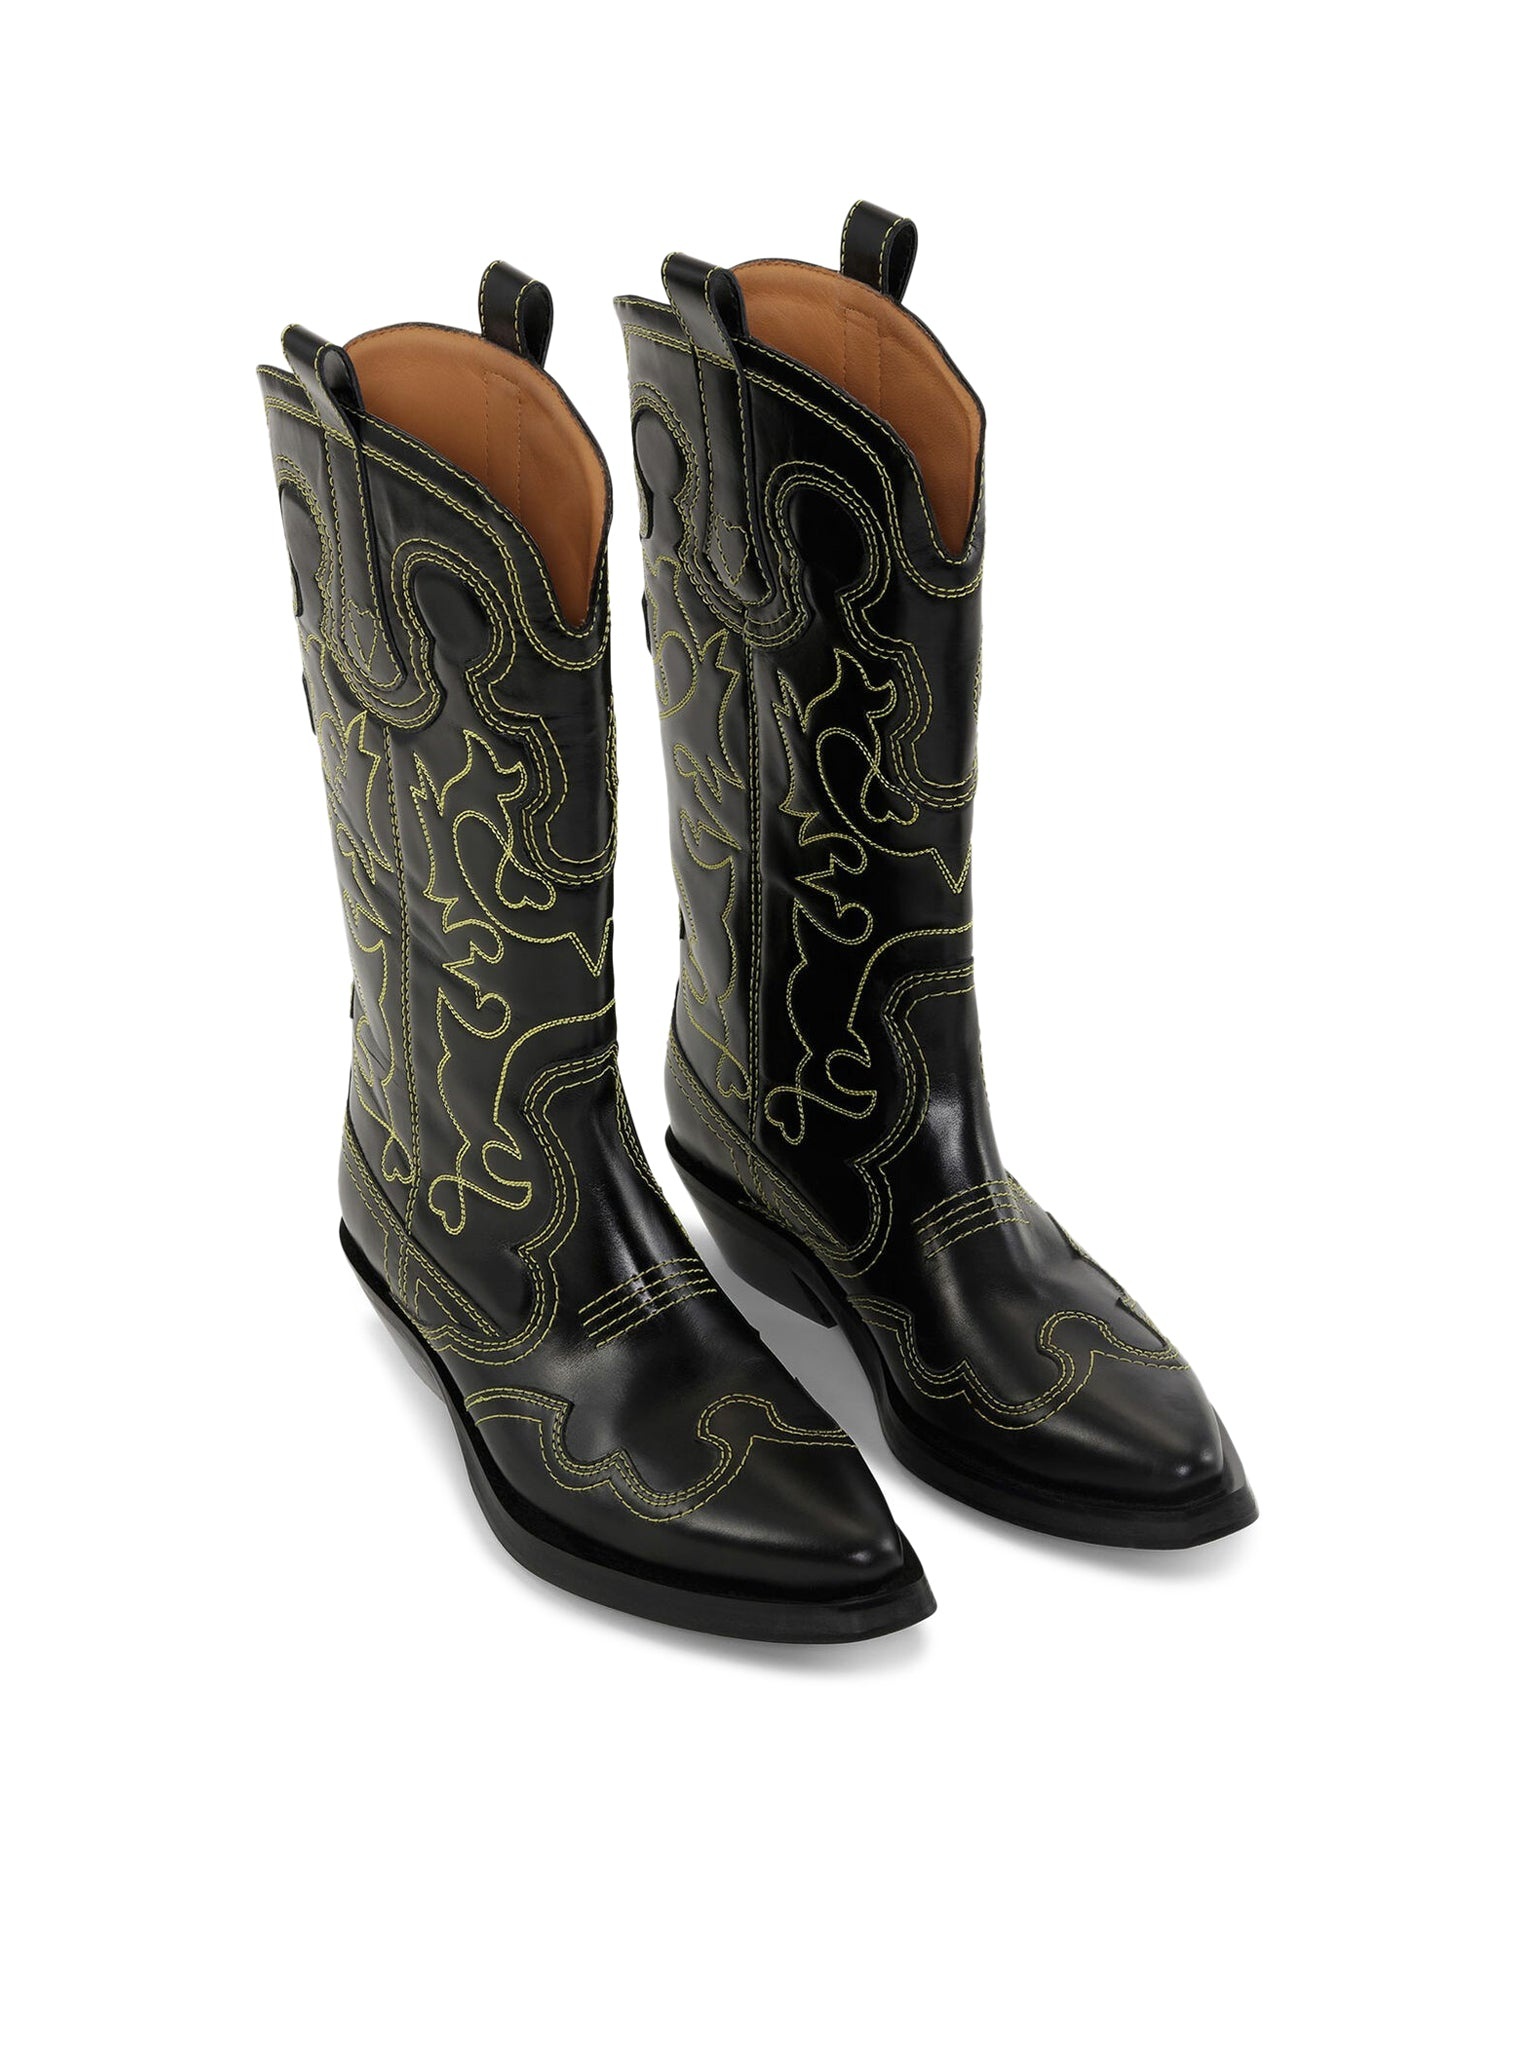 BLACK/YELLOW MID SHAFT EMBROIDERED WESTERN BOOTS - 2